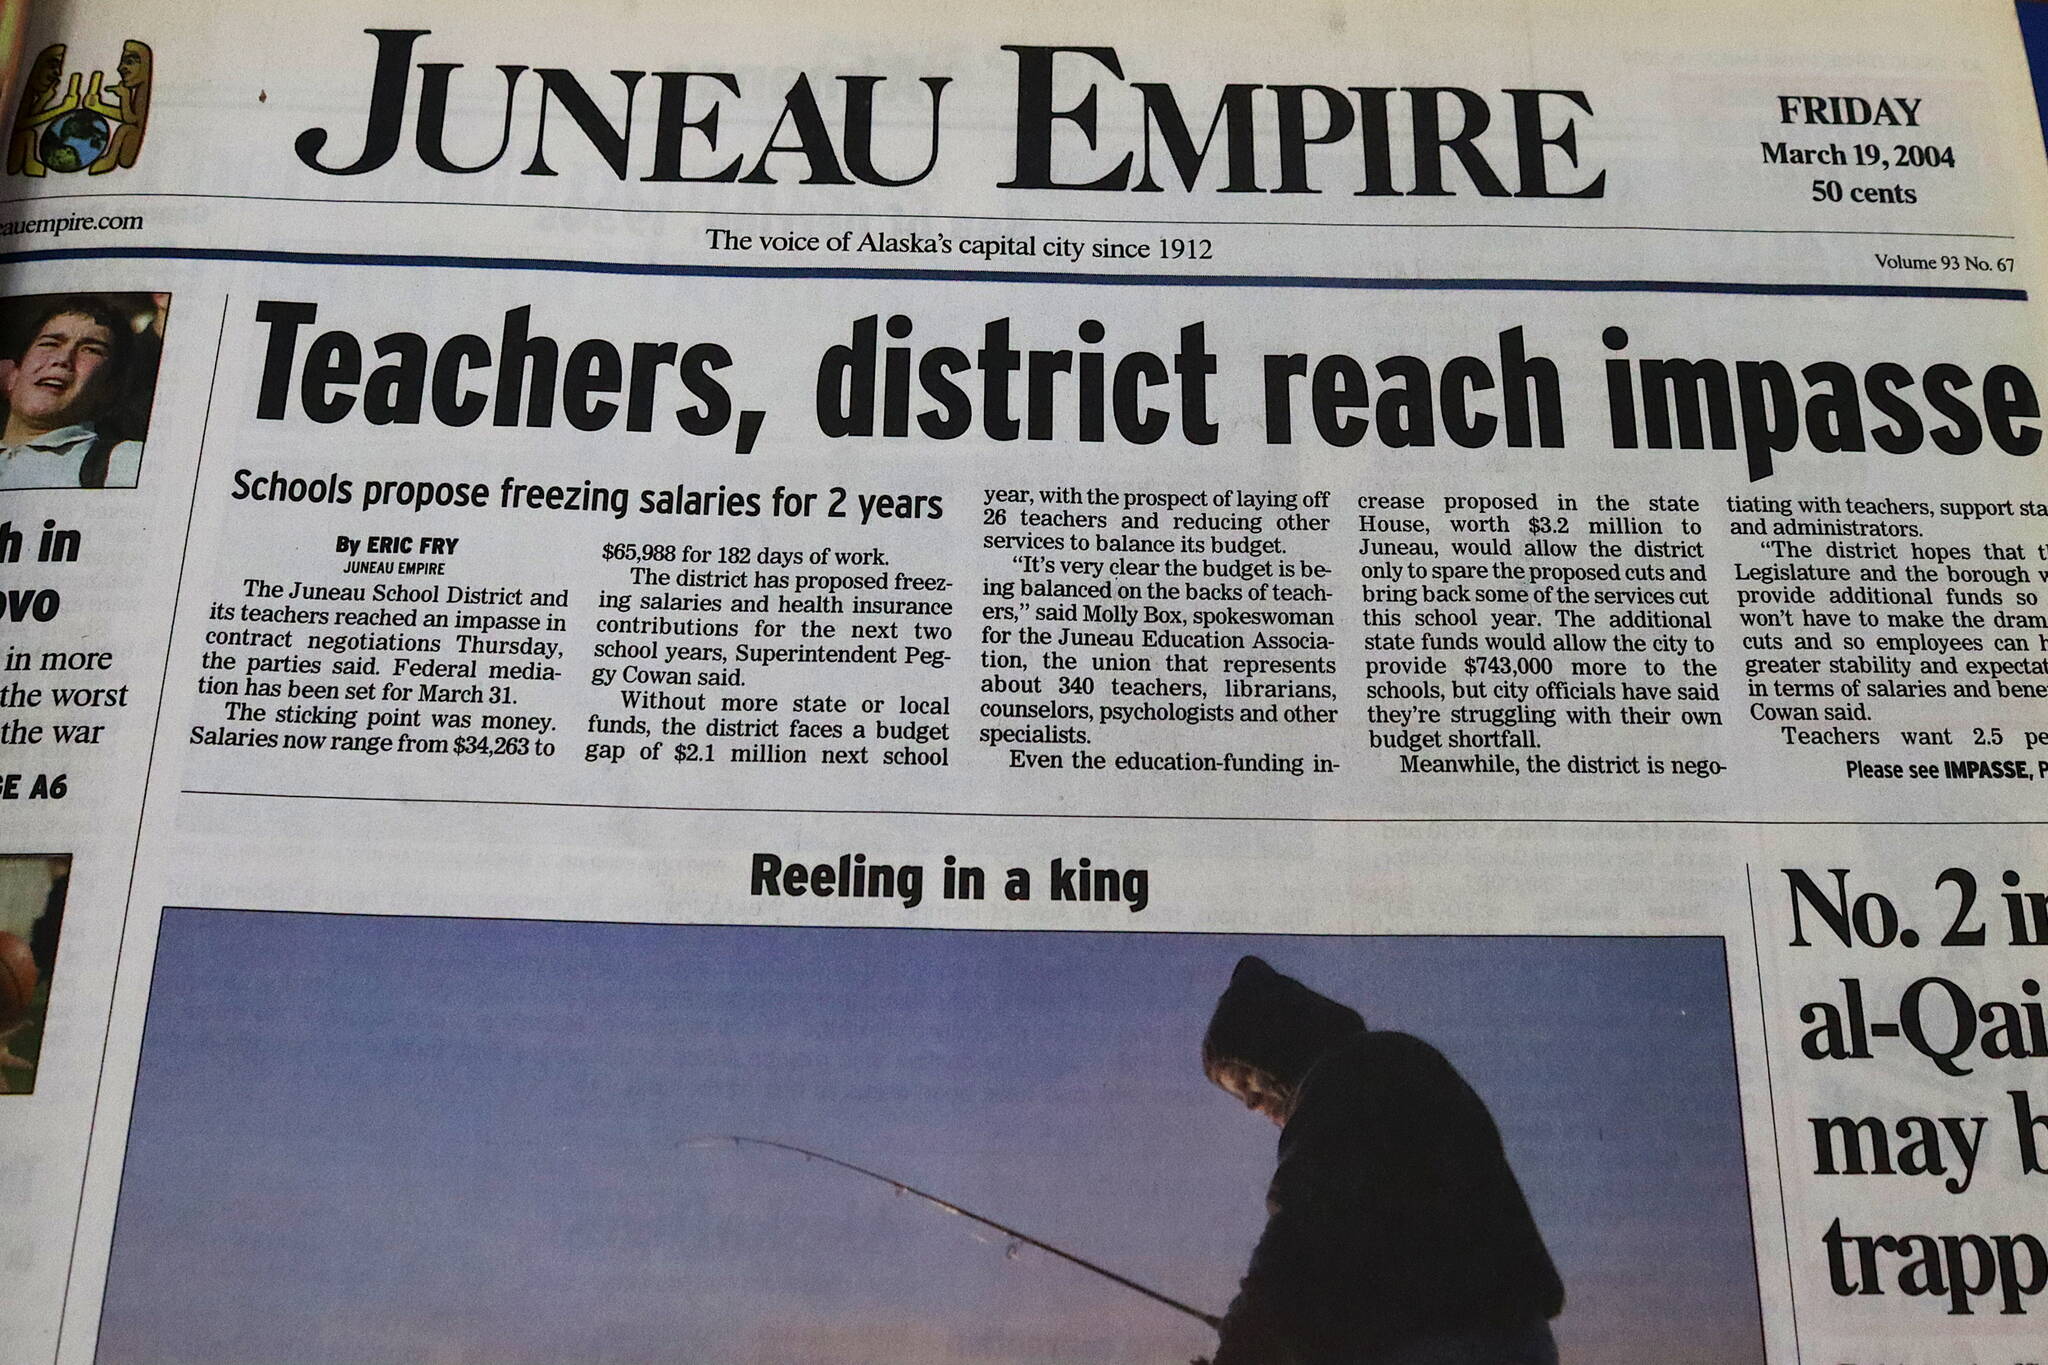 The front page of the Juneau Empire on March 19, 2004. (Mark Sabbatini / Juneau Empire)